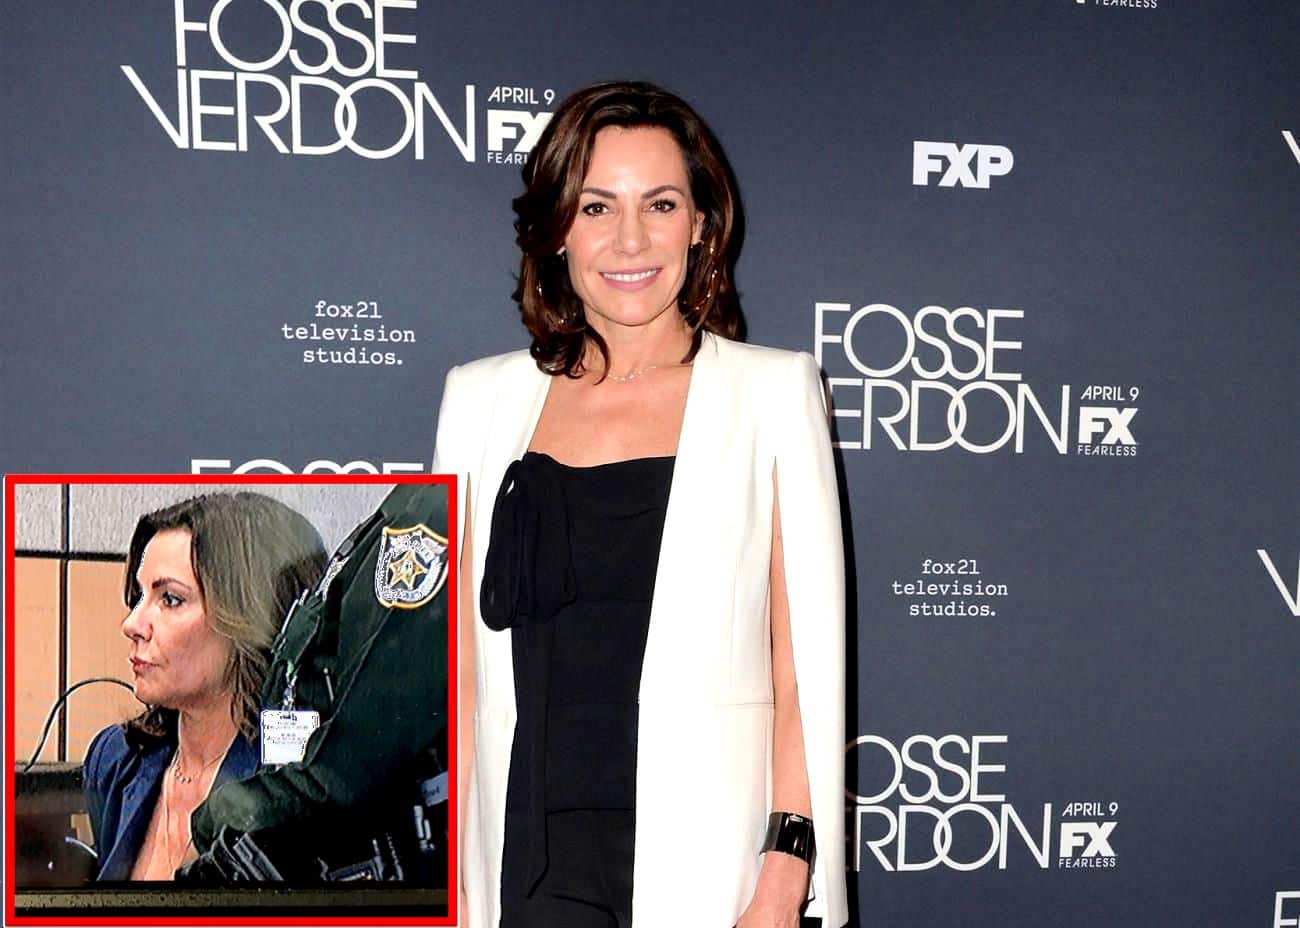 PHOTO: RHONY Star Luann de Lesseps Sent to Jail by Judge After Violating Her Probation